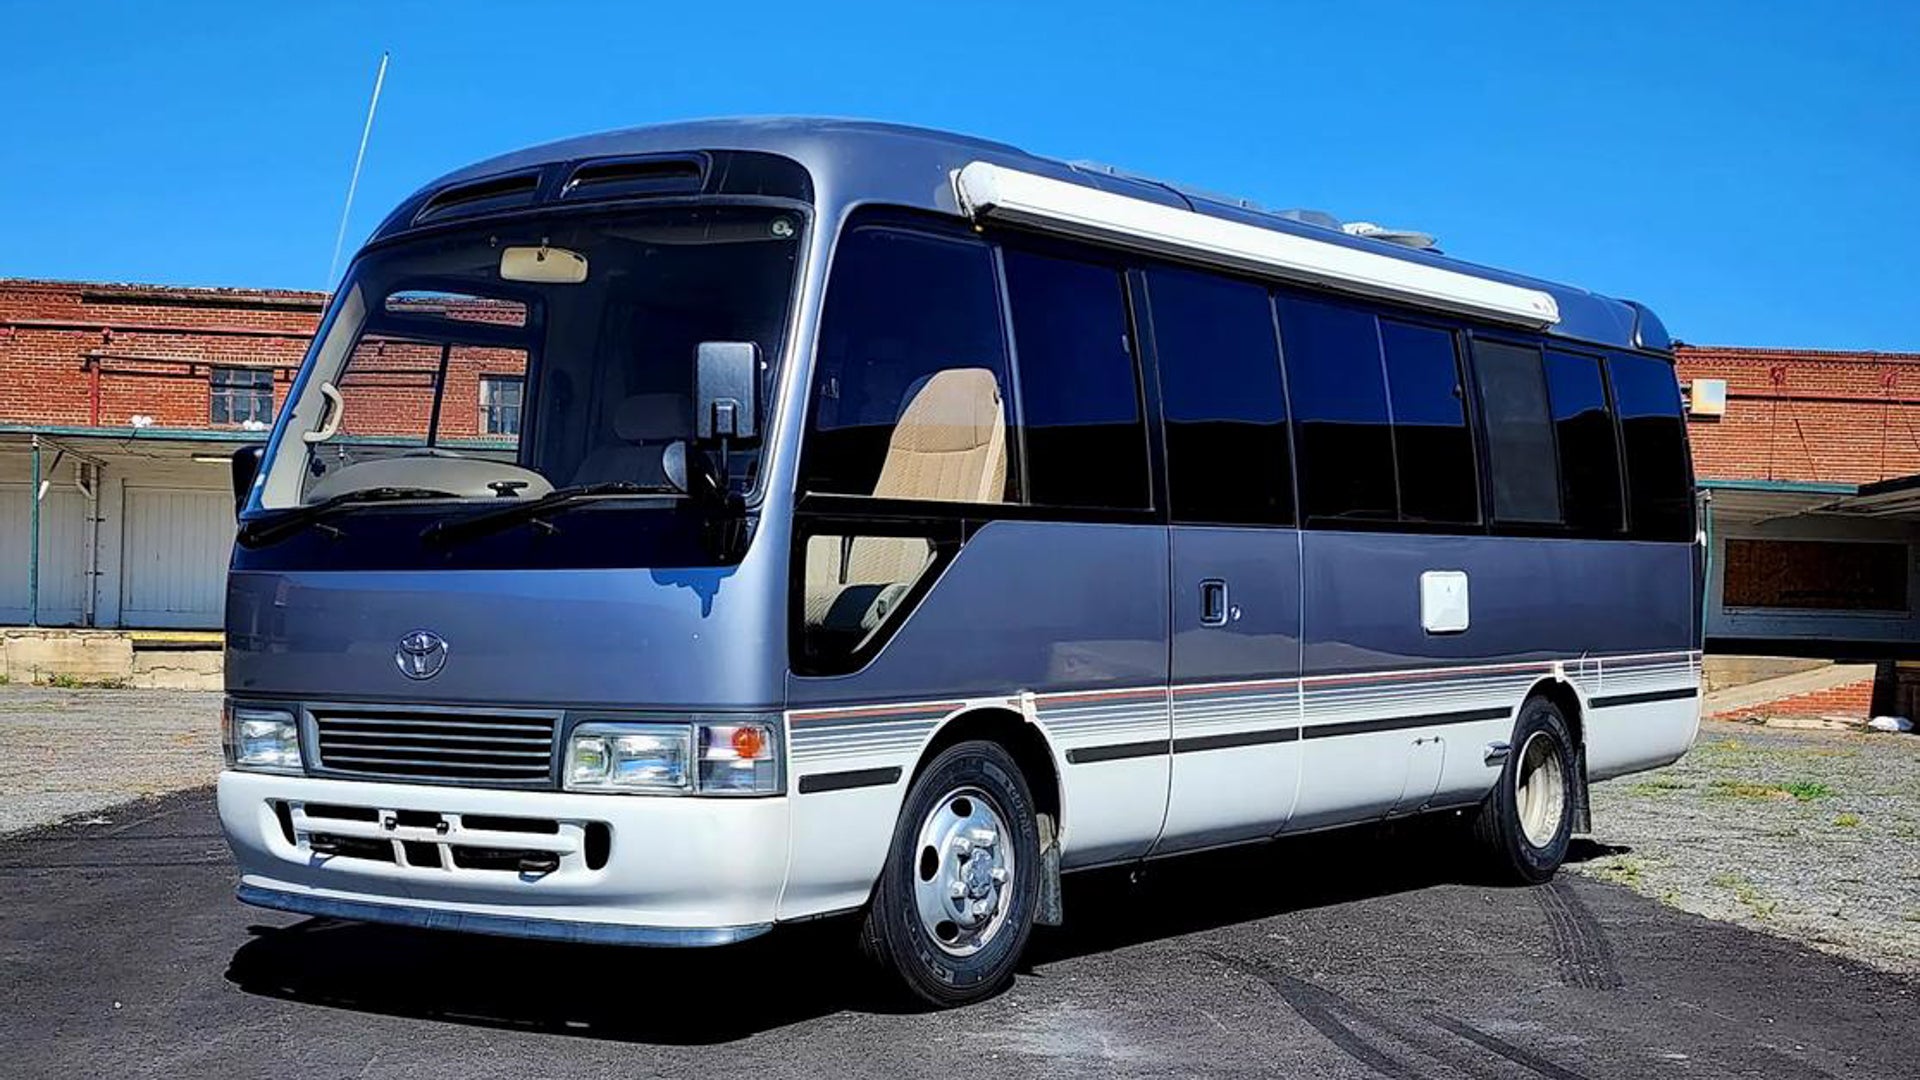 1994 Toyota Coaster RV for Sale Is a Turbodiesel JDM Road-Tripper